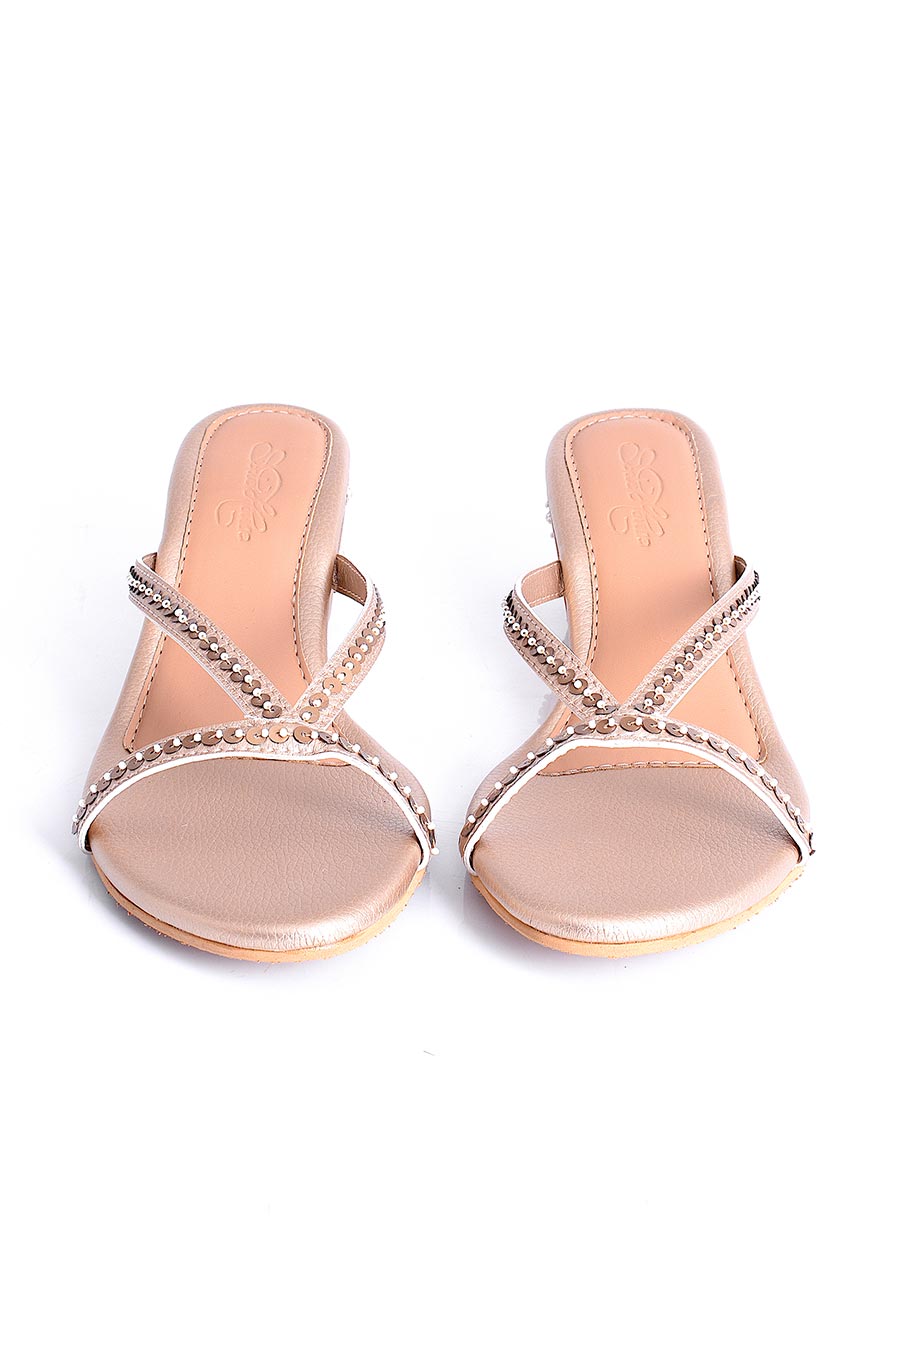 Celine Gold Strappy Sandals With Heel